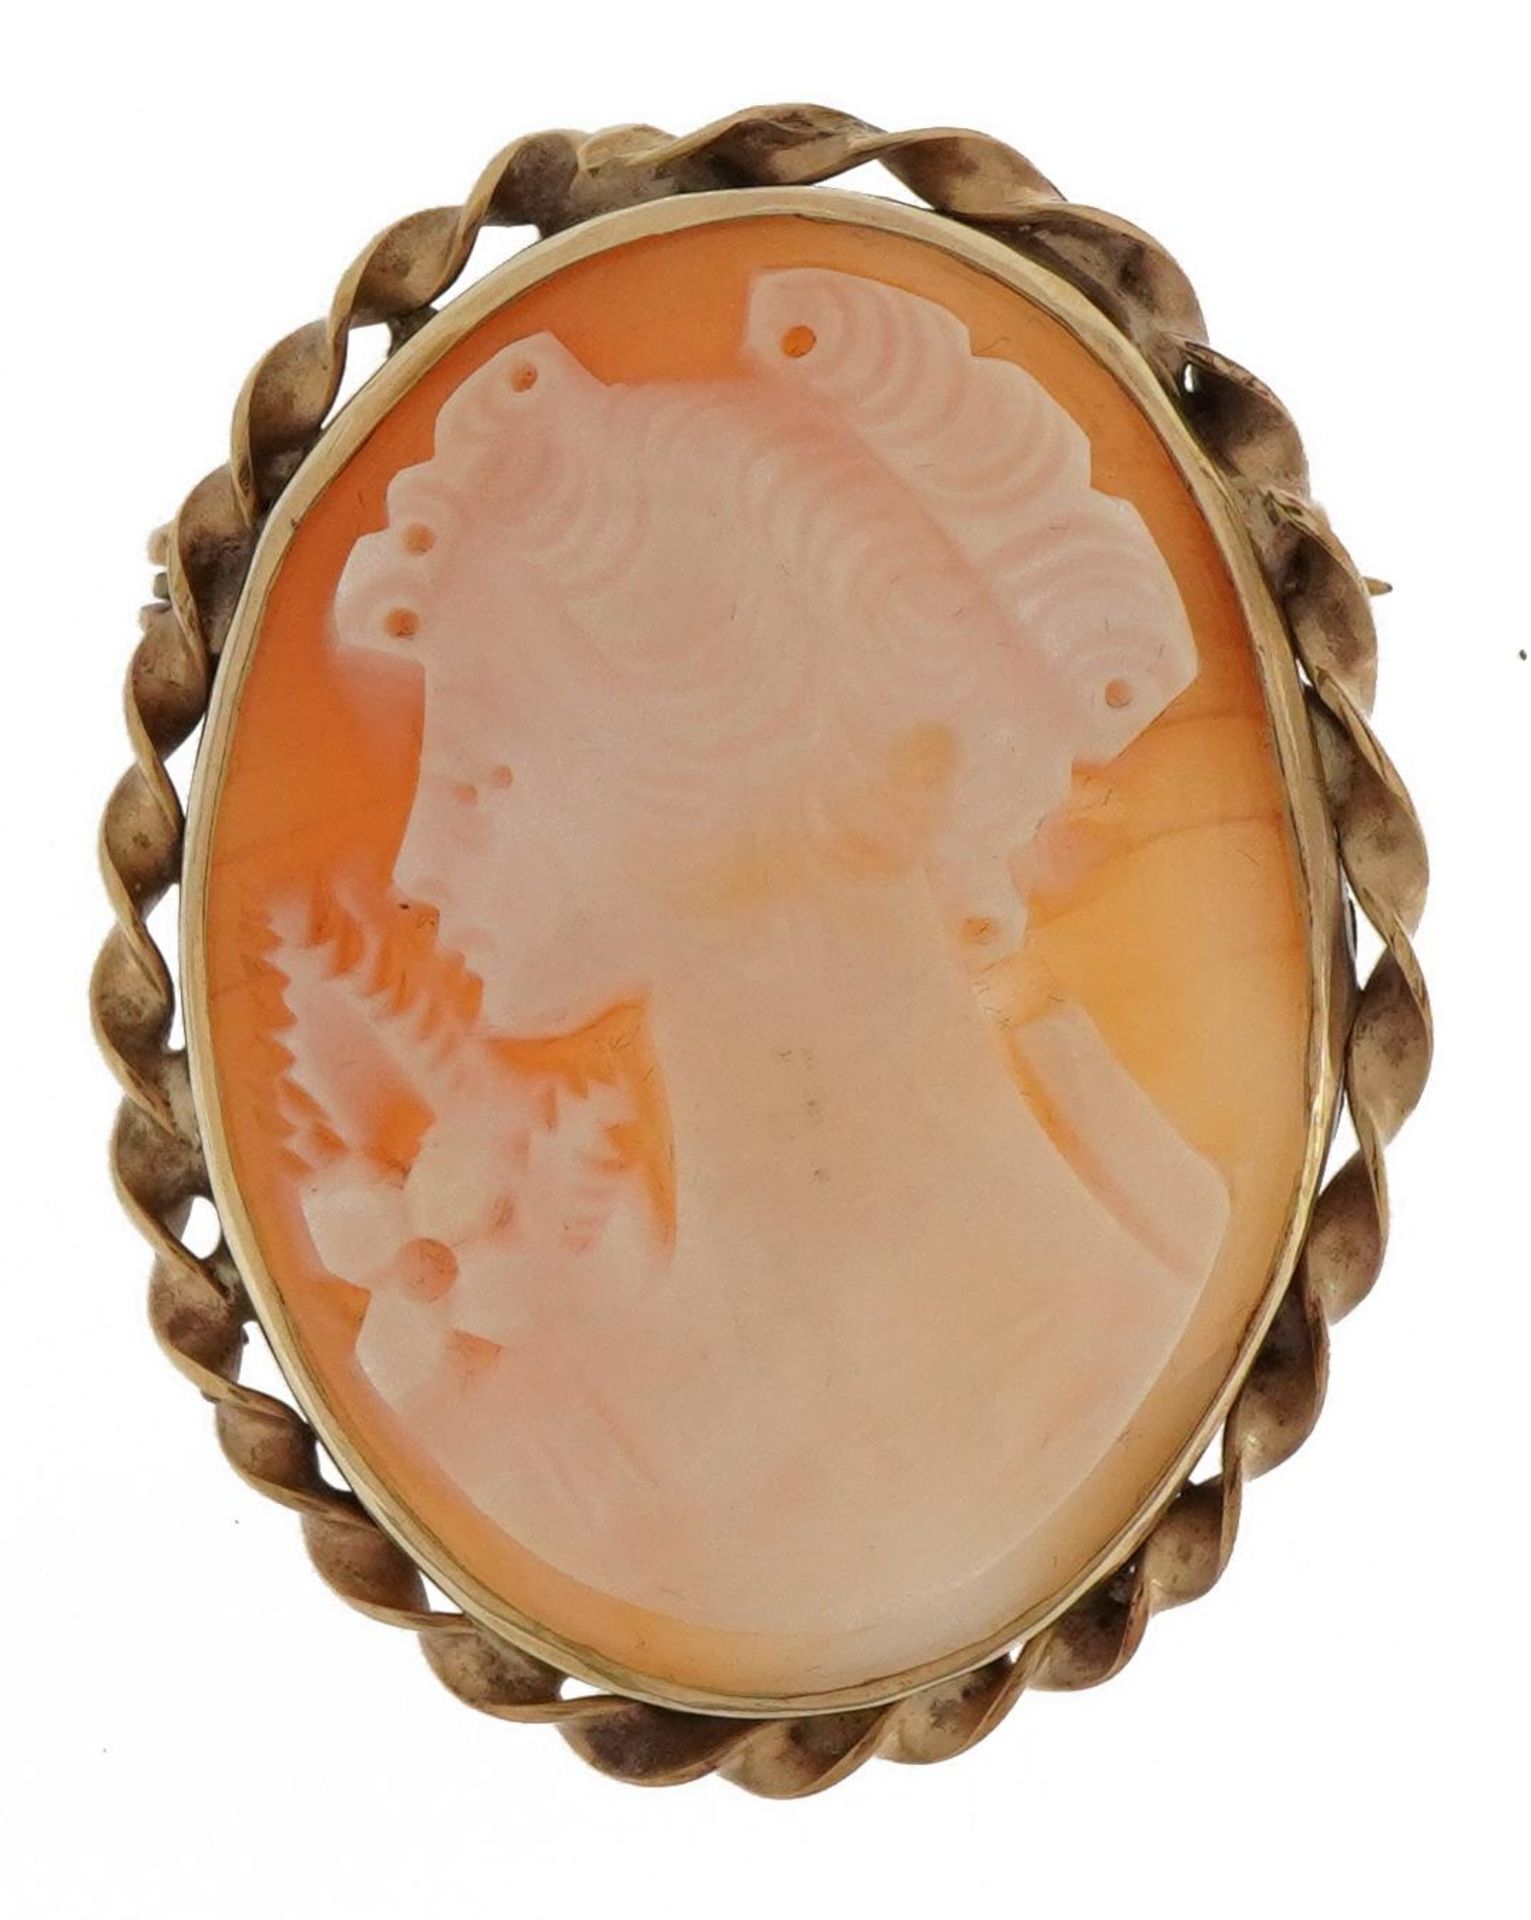 9ct gold mounted cameo maiden head brooch, 3.7cm high, 8.8g